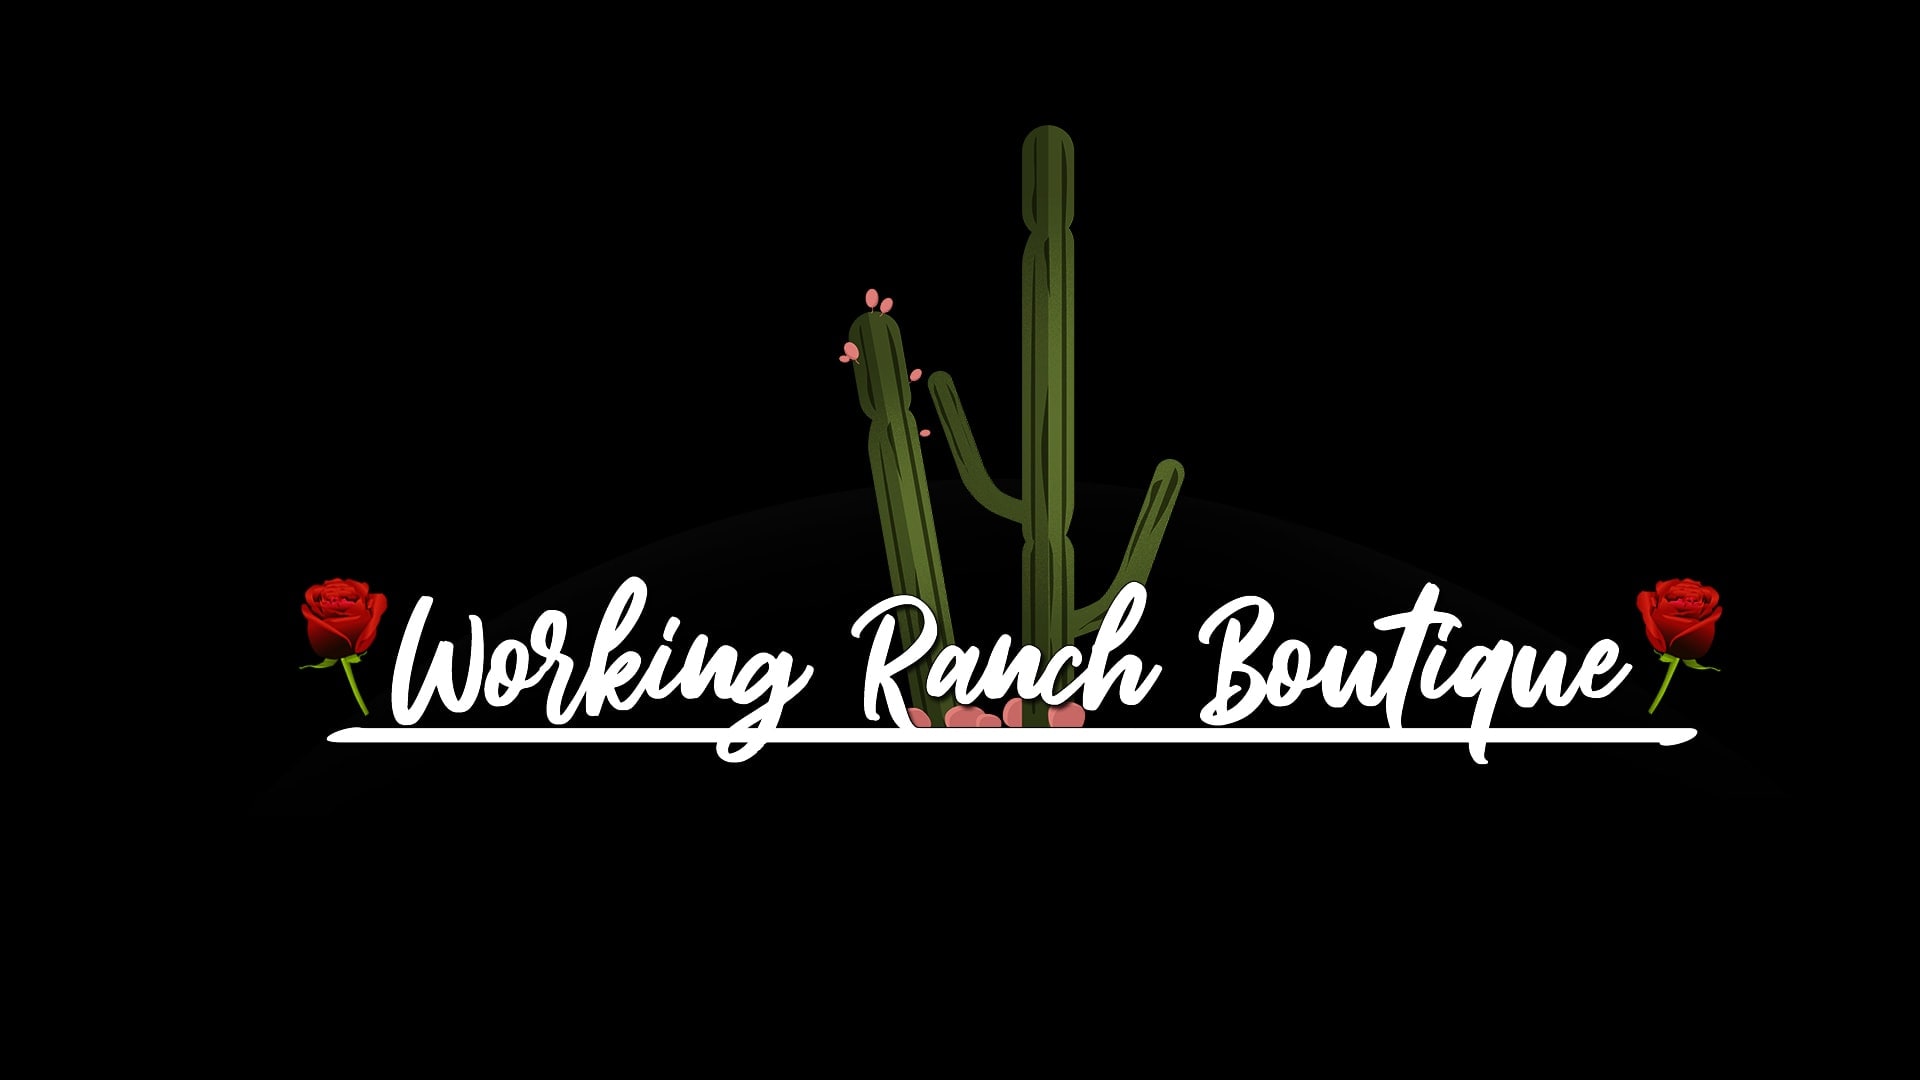 Working Ranch Boutique